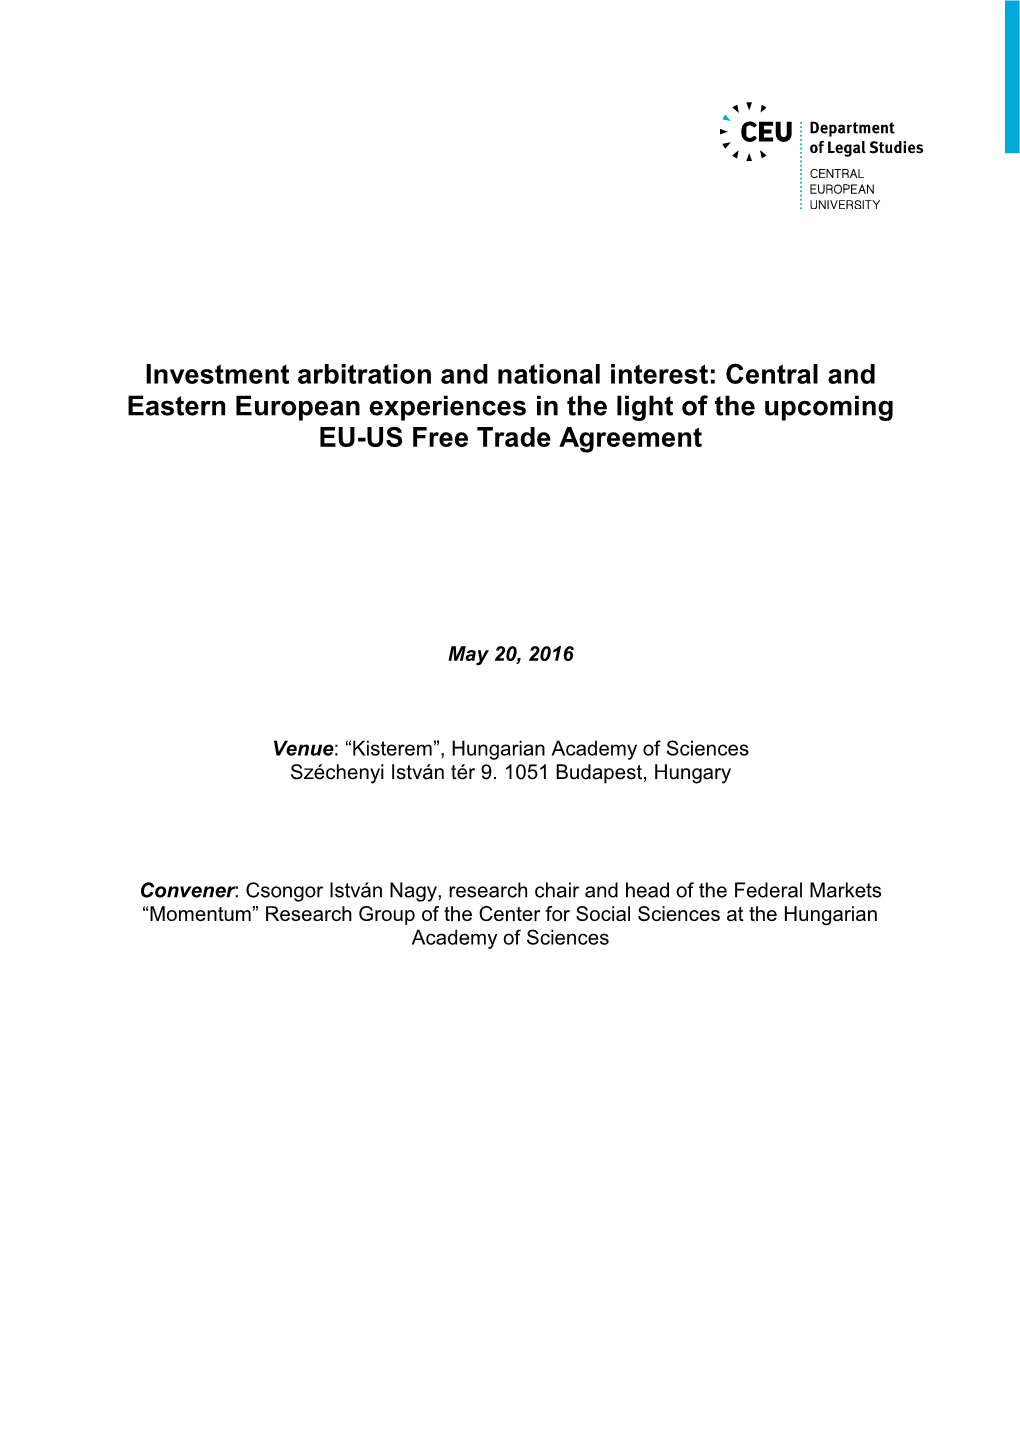 Investment Arbitration and National Interest: Central and Eastern European Experiences in the Light of the Upcoming EU-US Free Trade Agreement